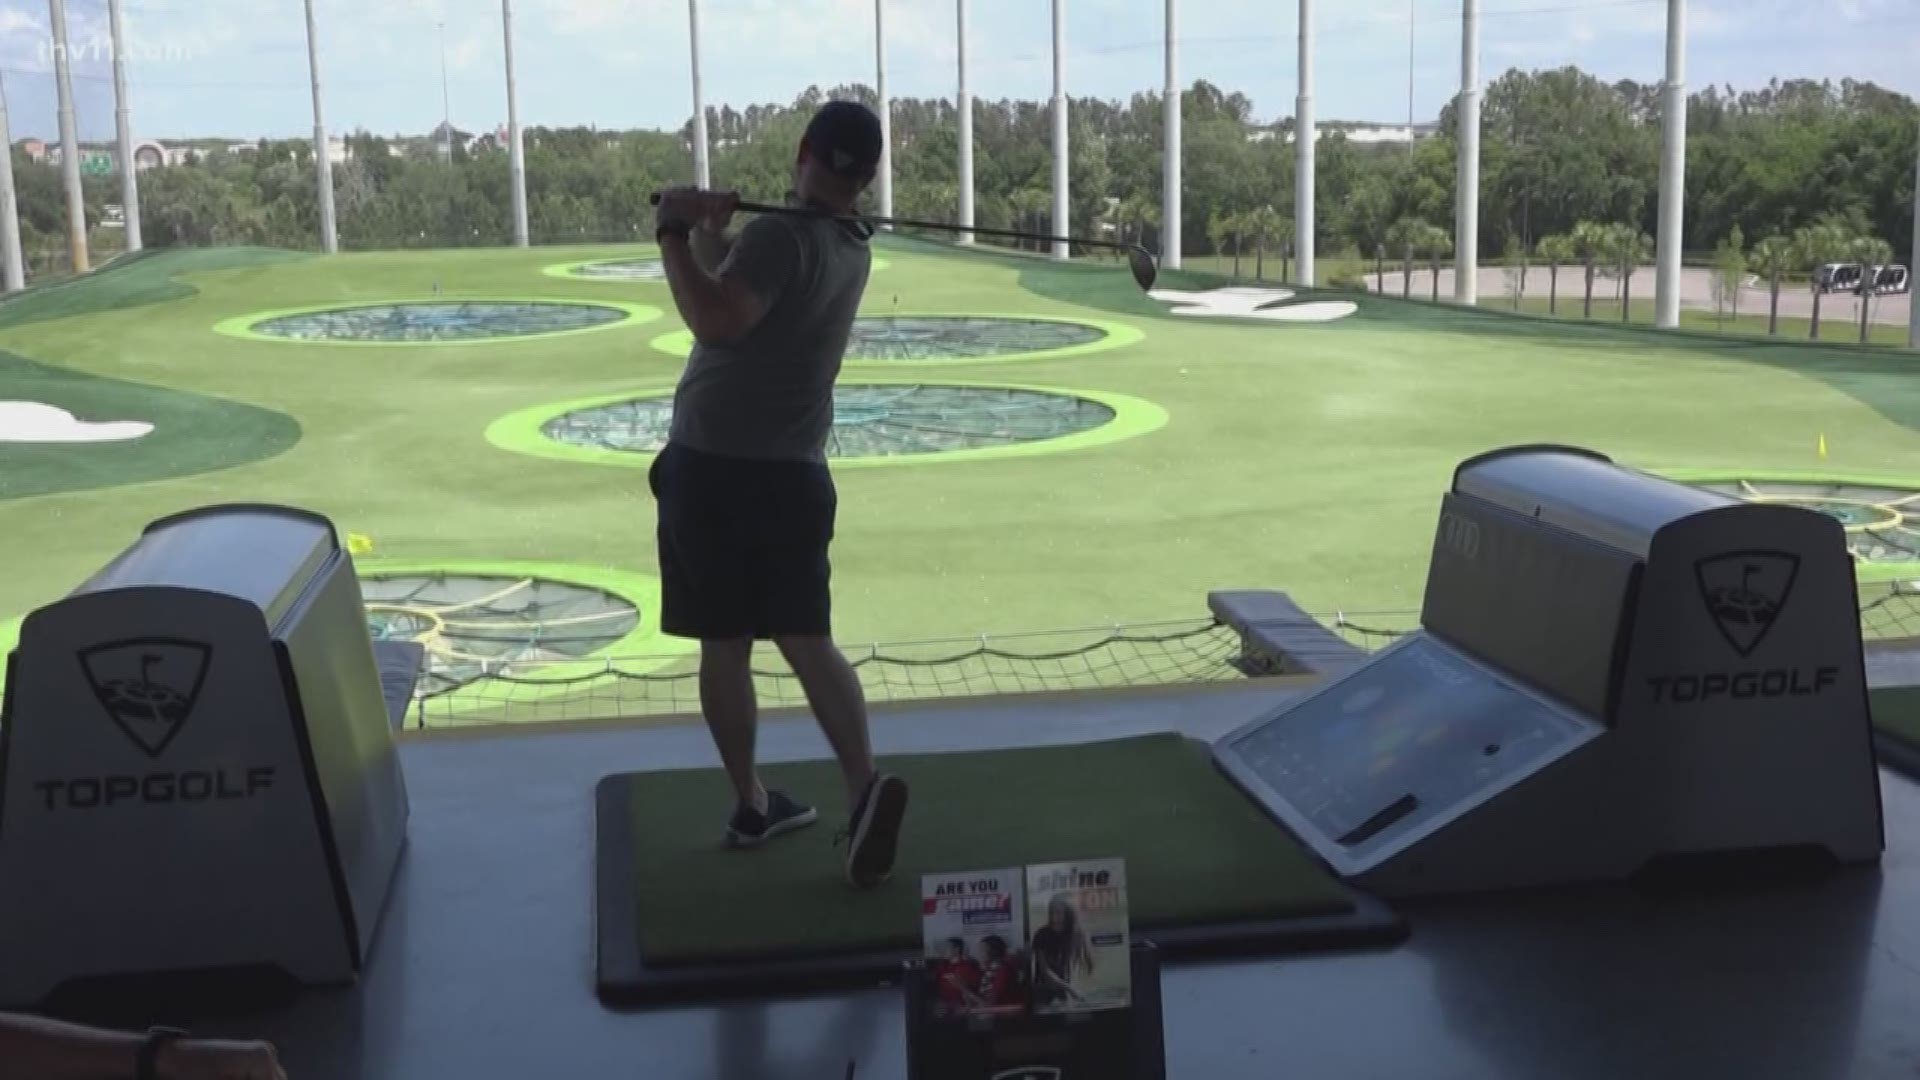 Proposal could bring Topgolf to War Memorial Park in Little Rock